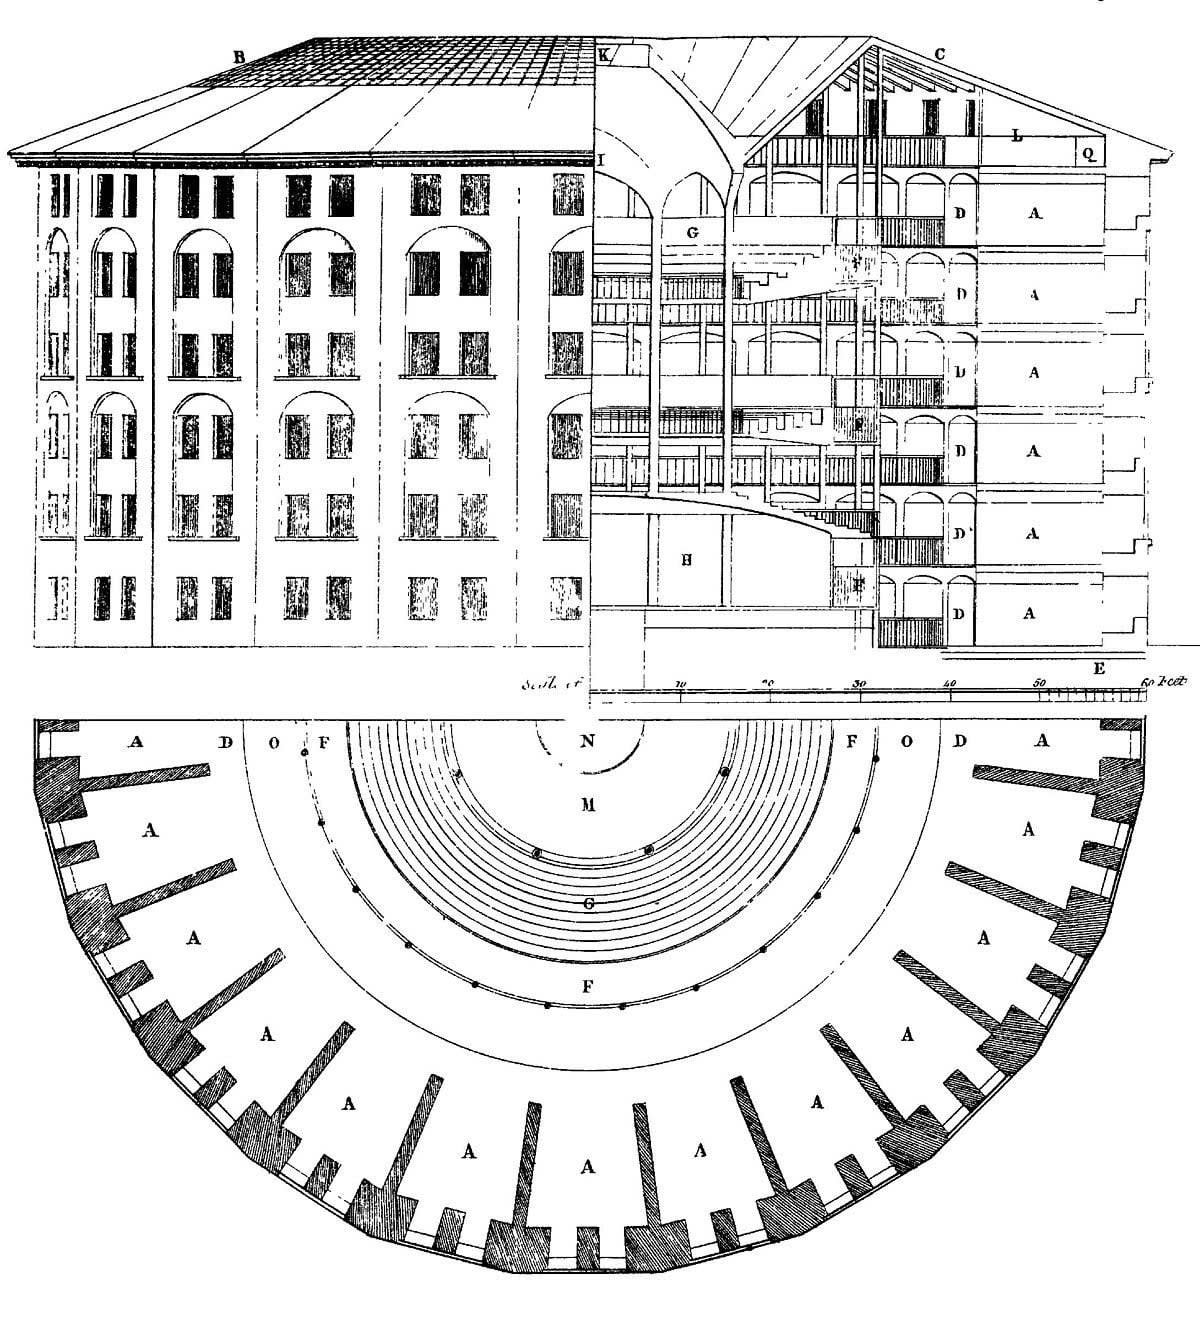 TIL That a Panopticon is a specifically designed jail that allows all prisoners of an institution to be observed by a single security guard, without the inmates knowing whether or not they are being watched.